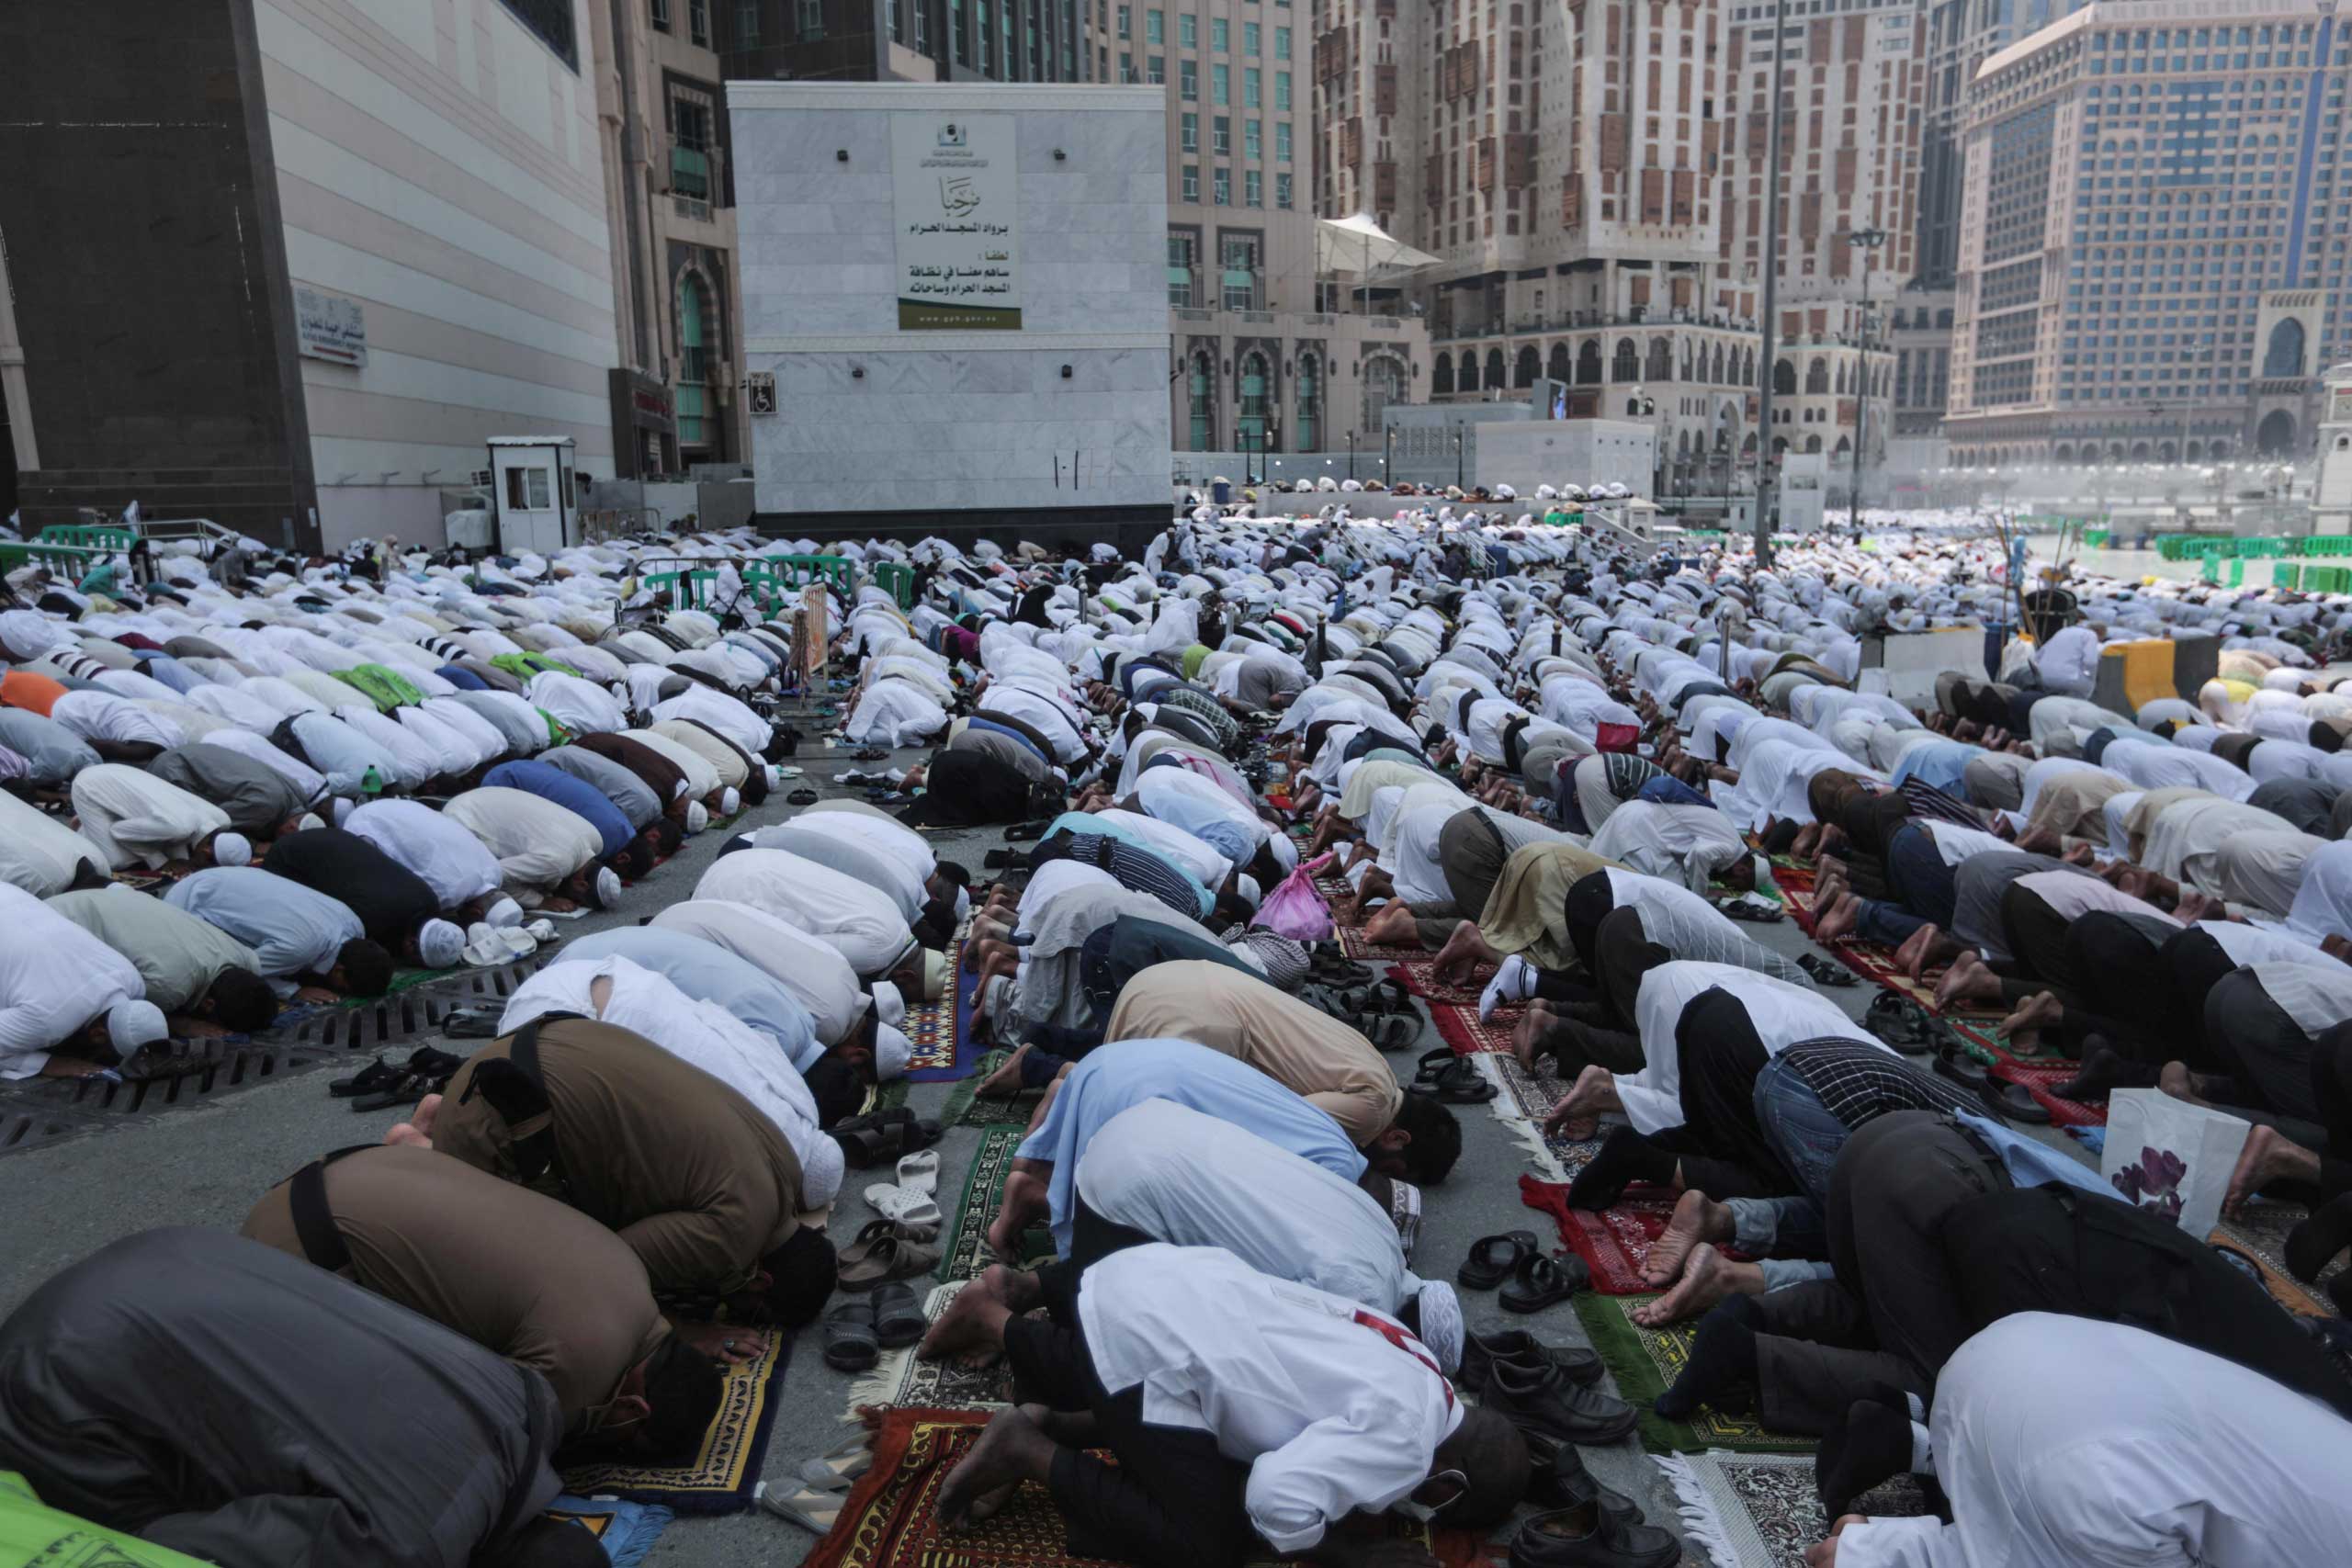 Muslim Pilgrims pray during Friday afternoon prayers outside the Grand Mosque in the holy city of Mecca, on Sep. 18, 2015.